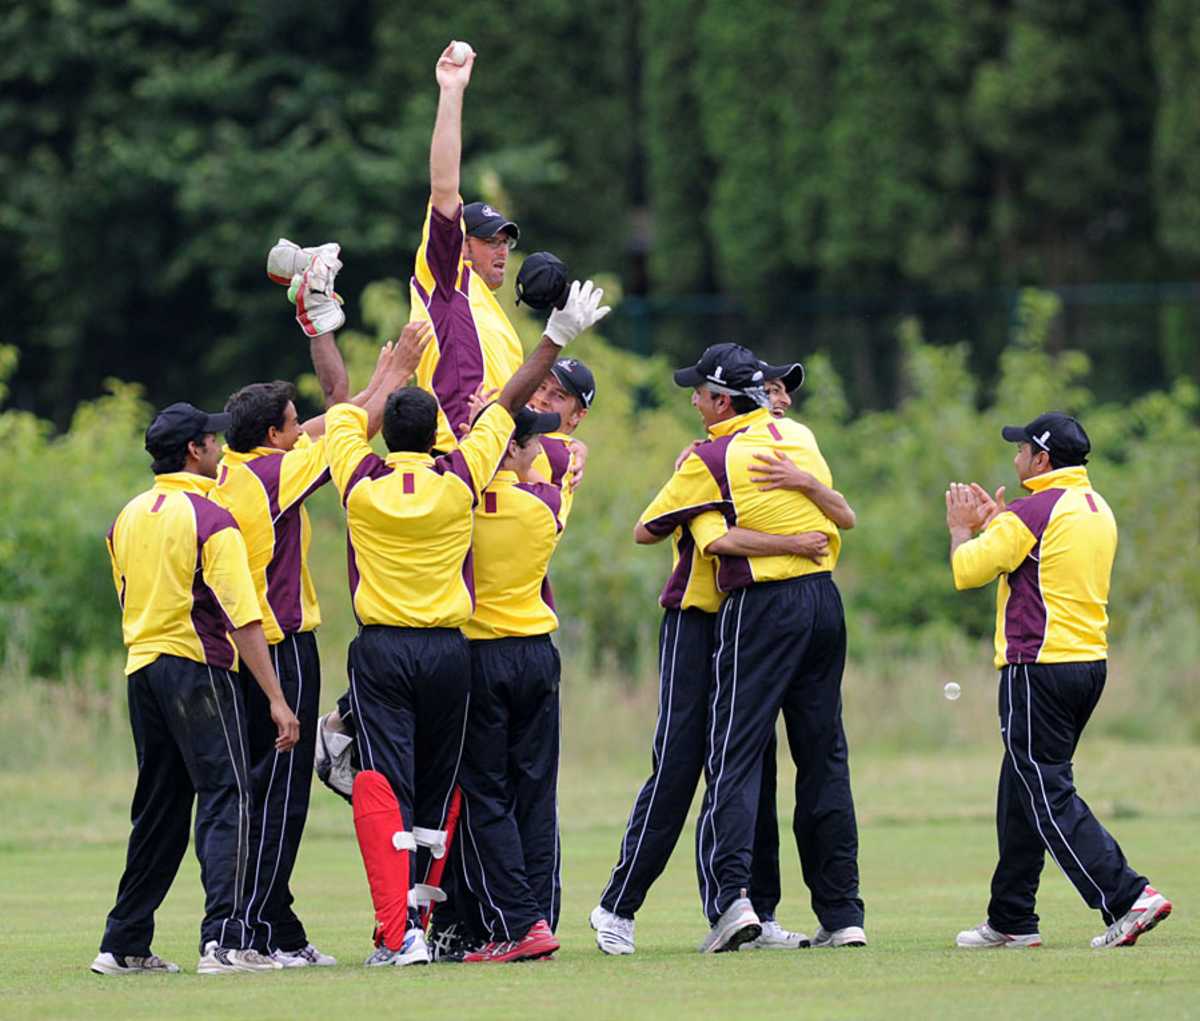 The Belgium players celebrate taking the final wicket against Austria